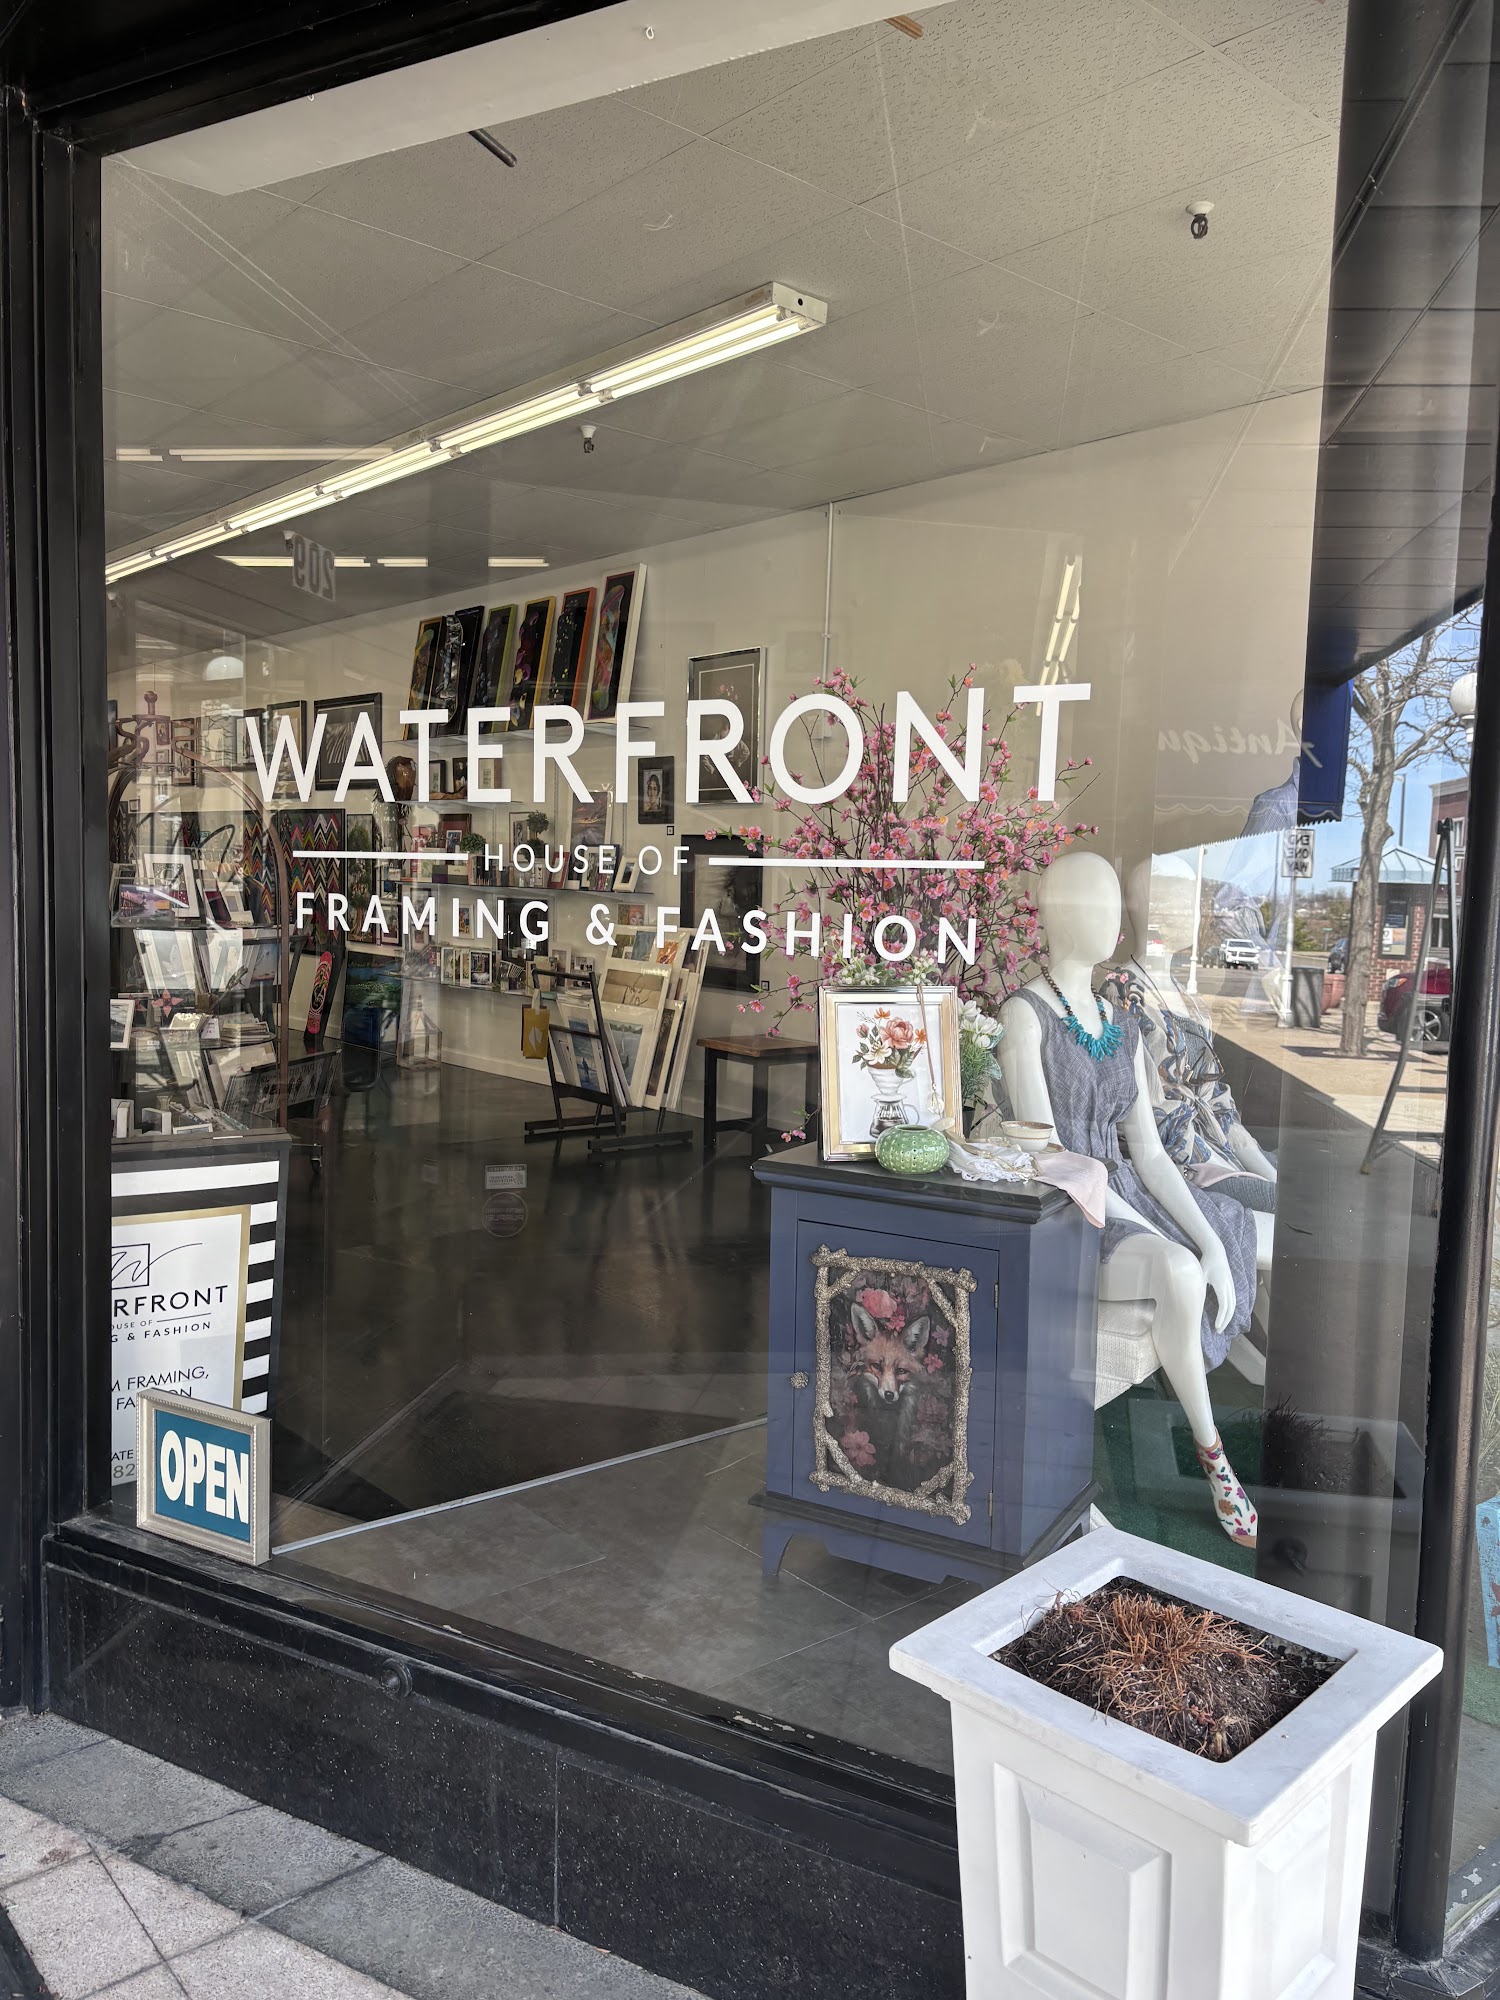 Waterfront House of Framing & Fashion